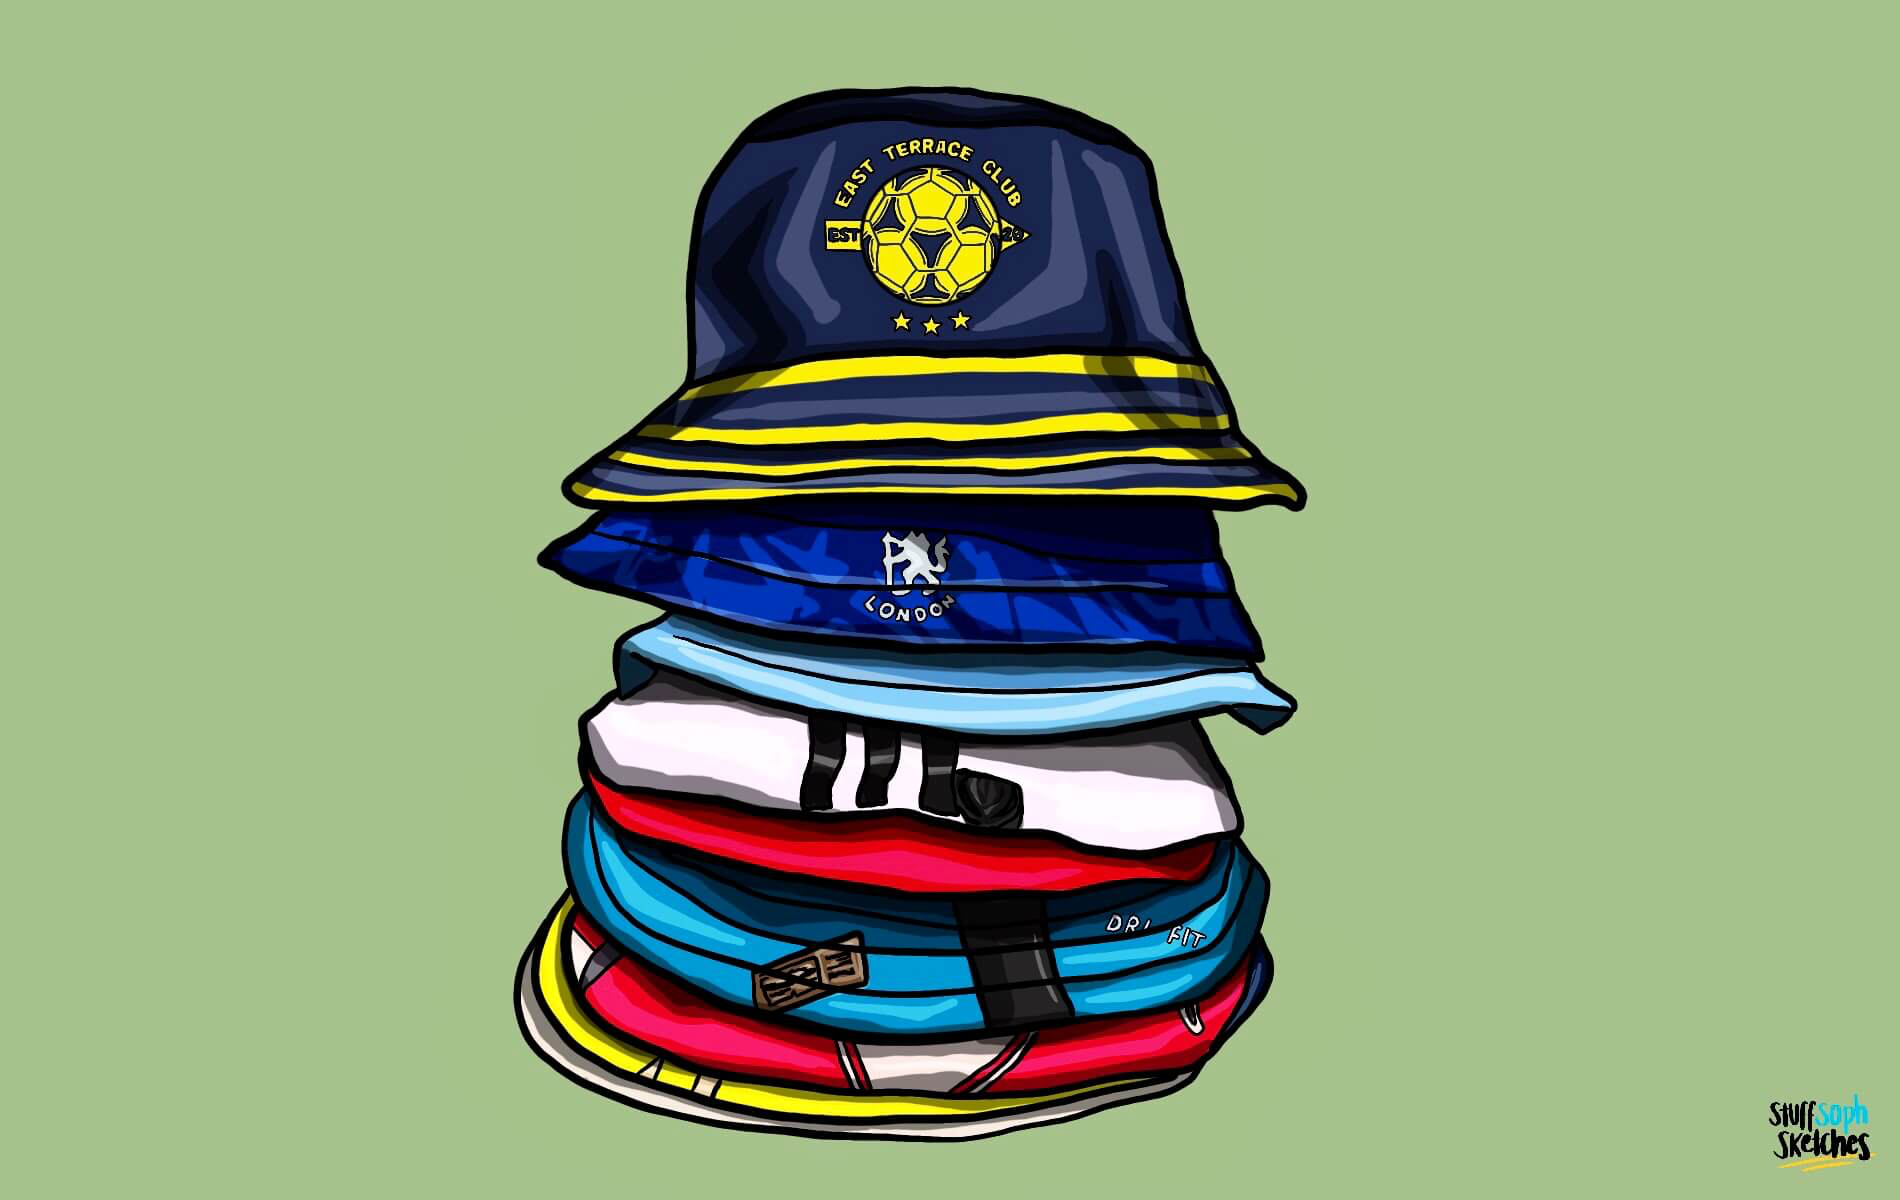 Neatly stacked pile of hats made from up-cycled football shirts